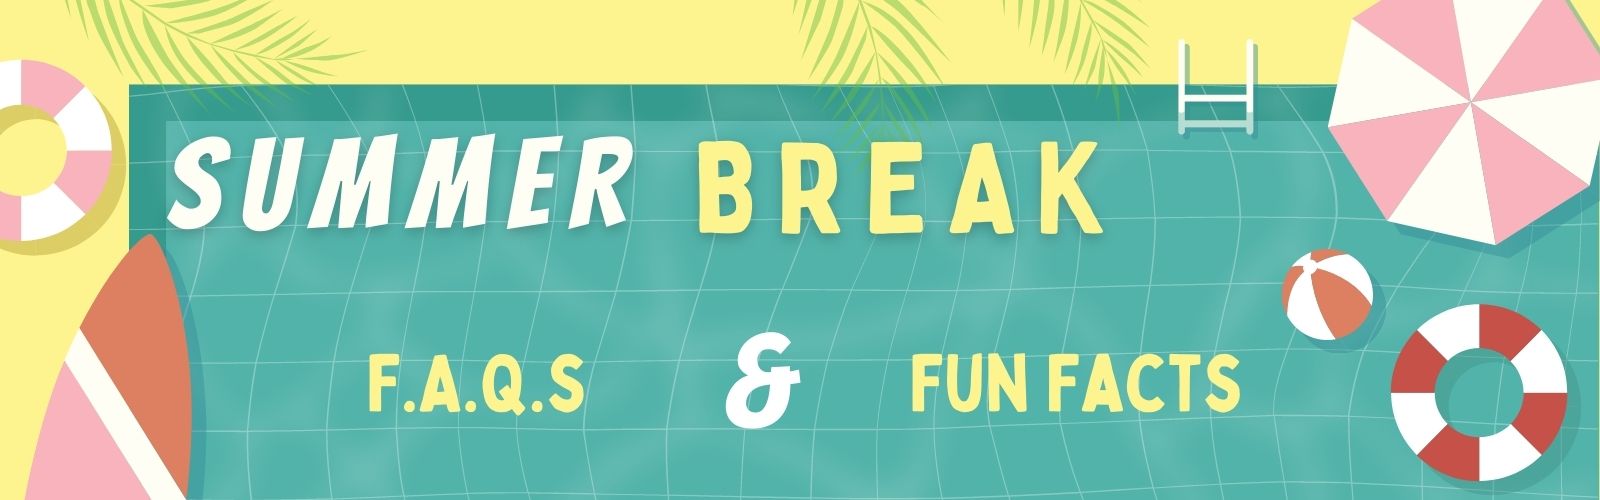 Summer Break F.A.Q.s and Fun Facts American Heritage Estates